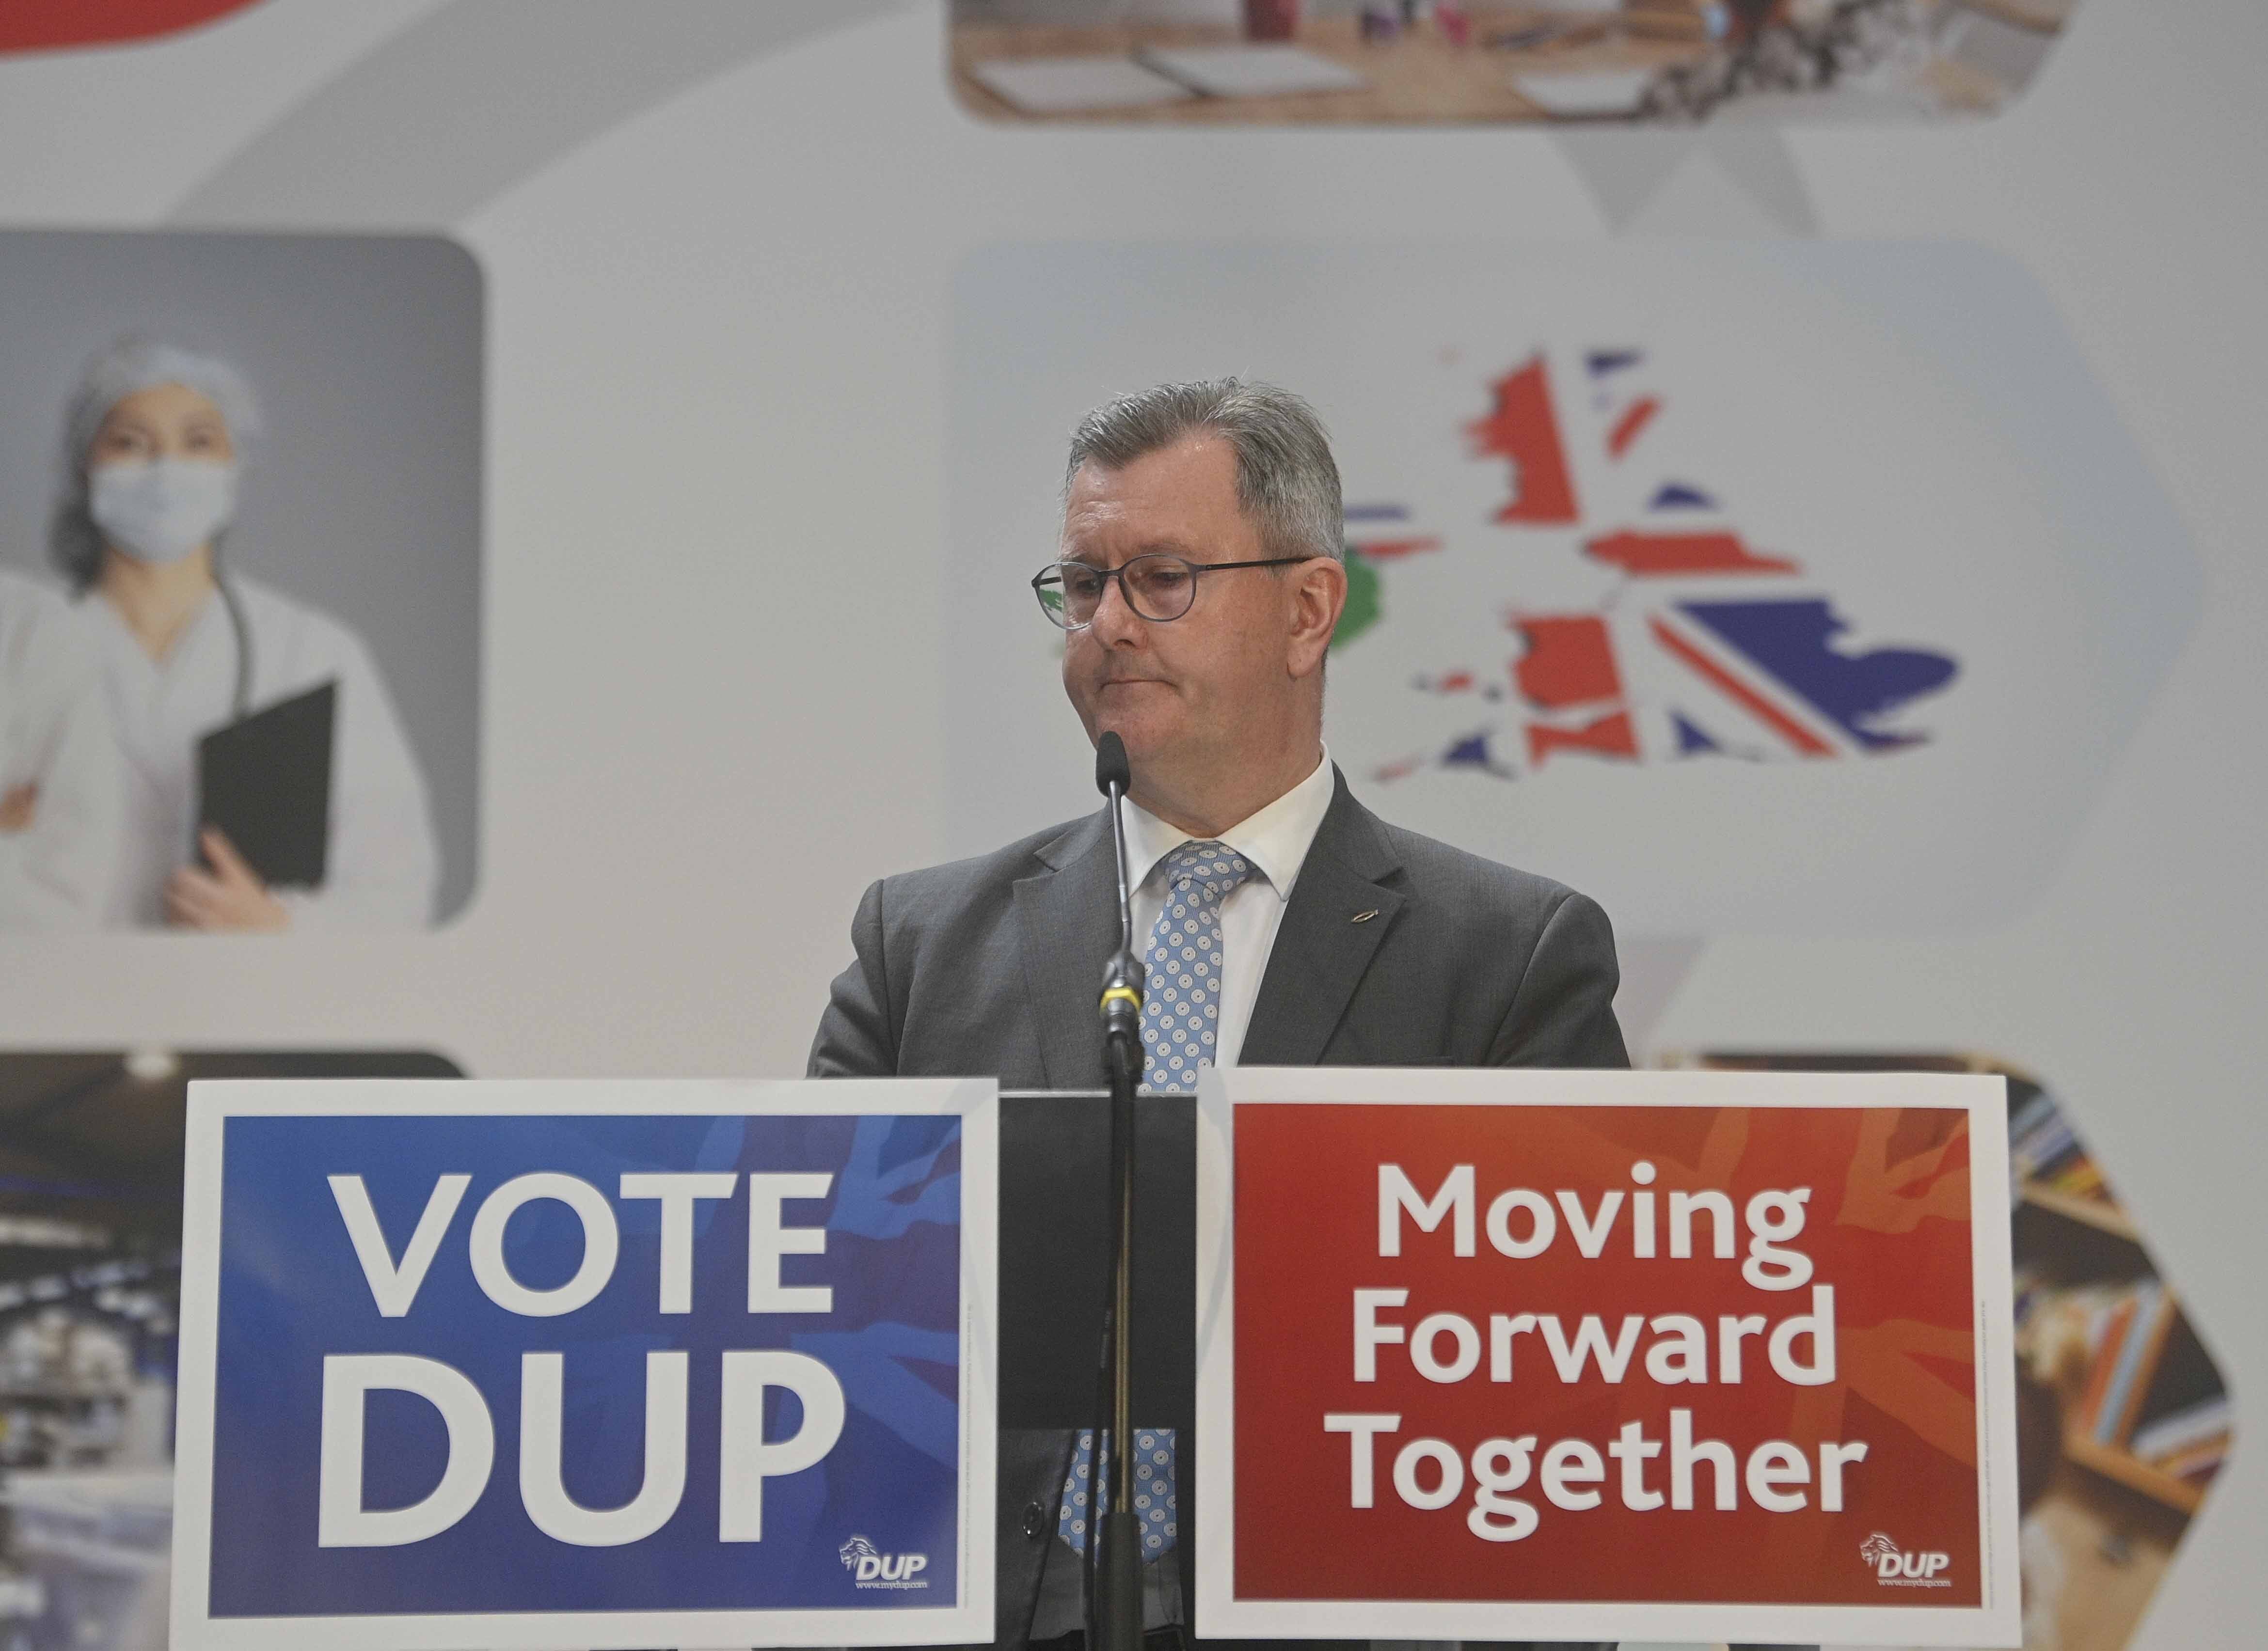 DUP leader Sir Jeffrey Donaldson during the party’s manifesto launch (PA)